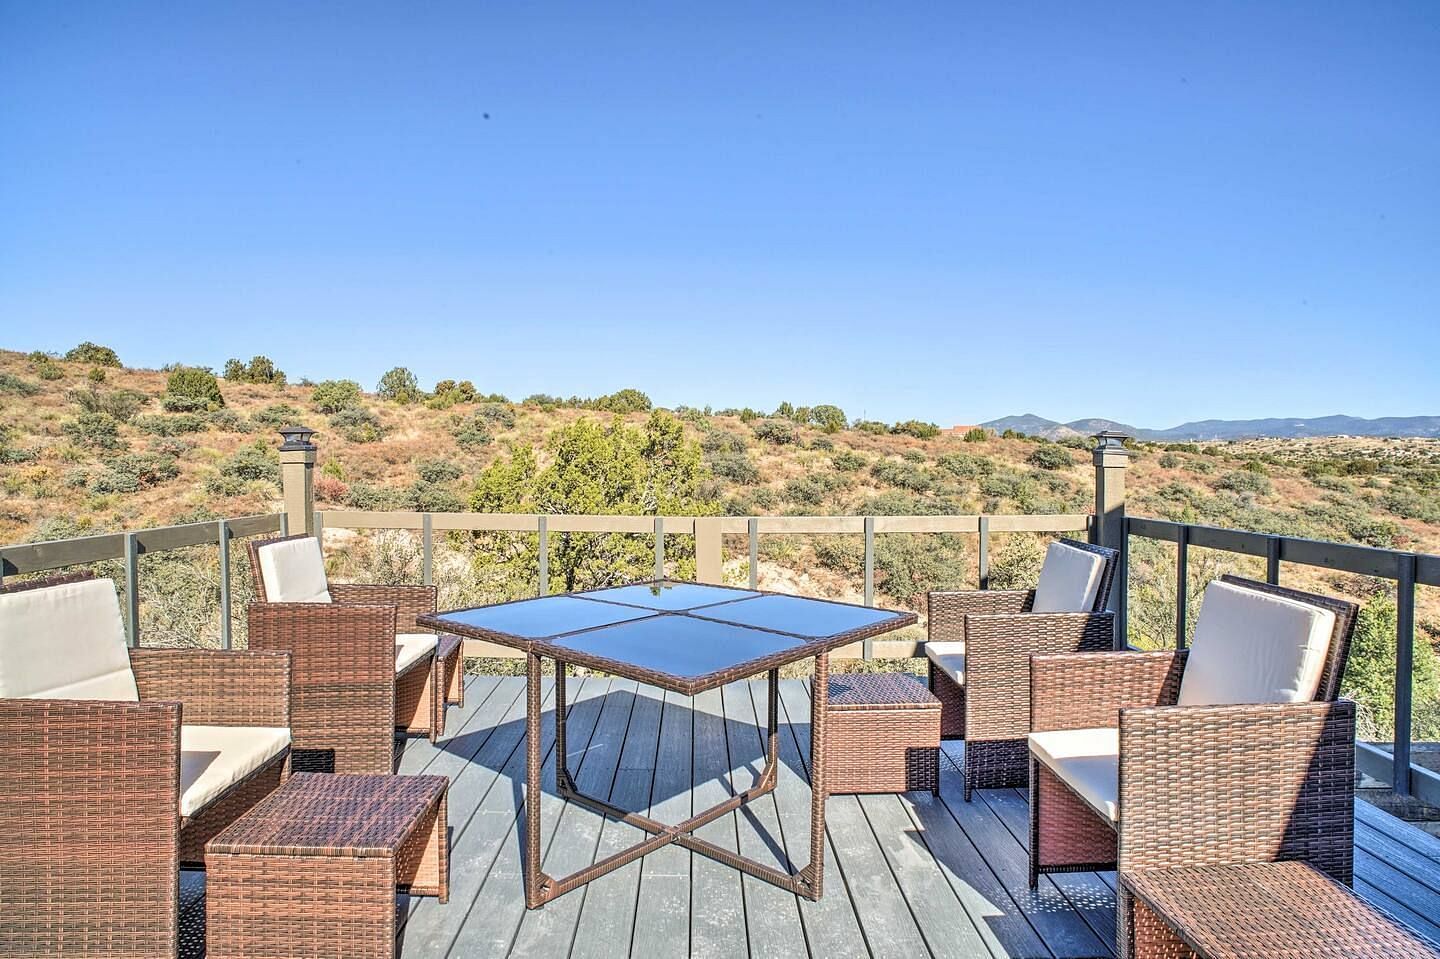 JWguest House at Silver City, New Mexico | 'The Quail' cottage, next to Silver City Oasis with Views | Jwbnb no brobnb 22